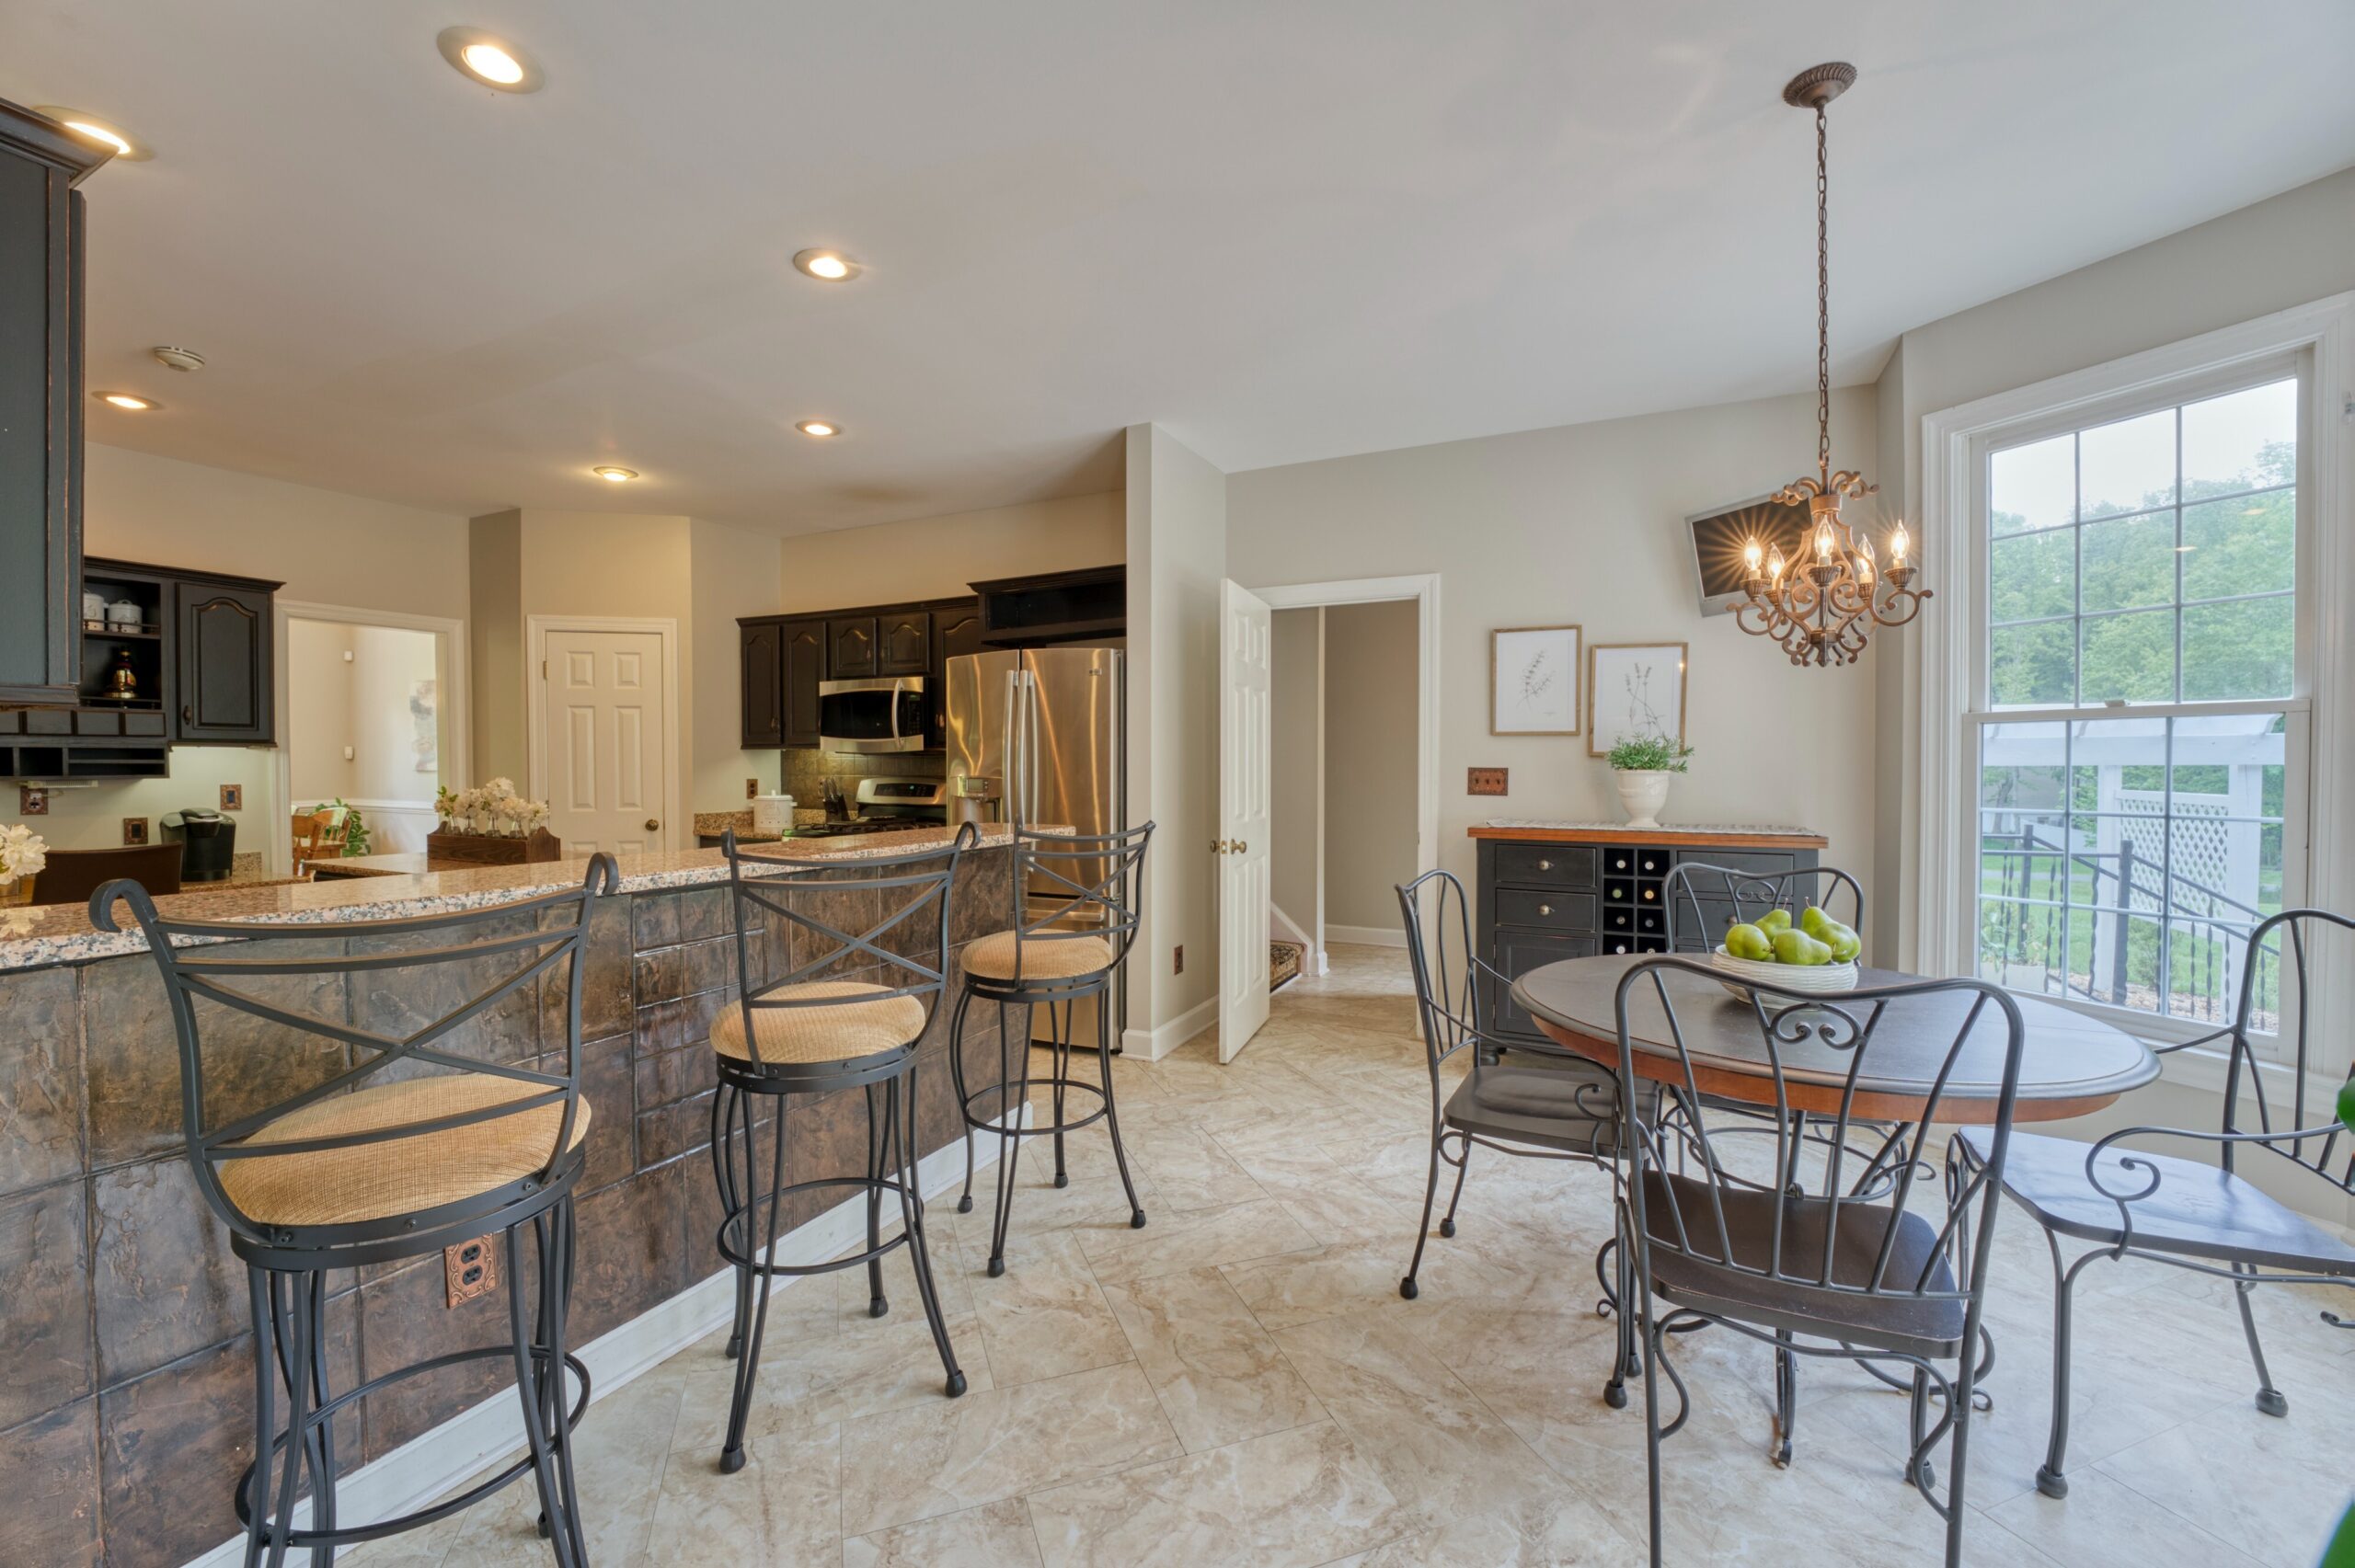 Professional interior photo of 13700 Holly Forest Dr - showing the breakfast area adjacent to the kitchen as well as the kitchen counter bar and 3 barstools